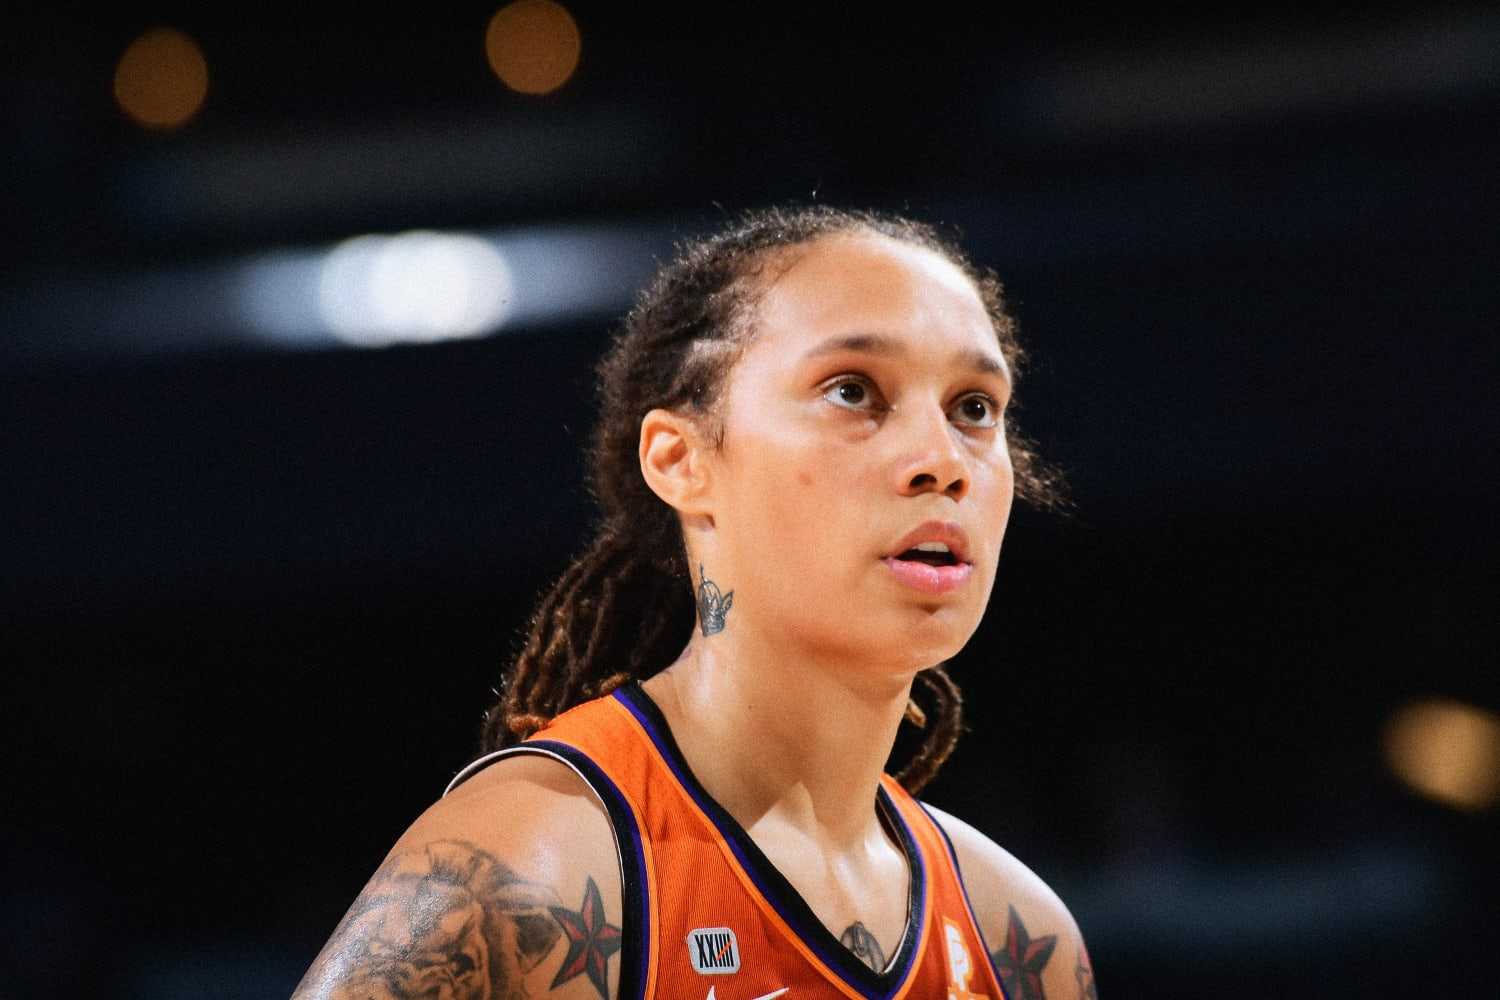 Coming Out In Basketball How Brittney Griner Found A Place Of Peace   Code Switch  NPR